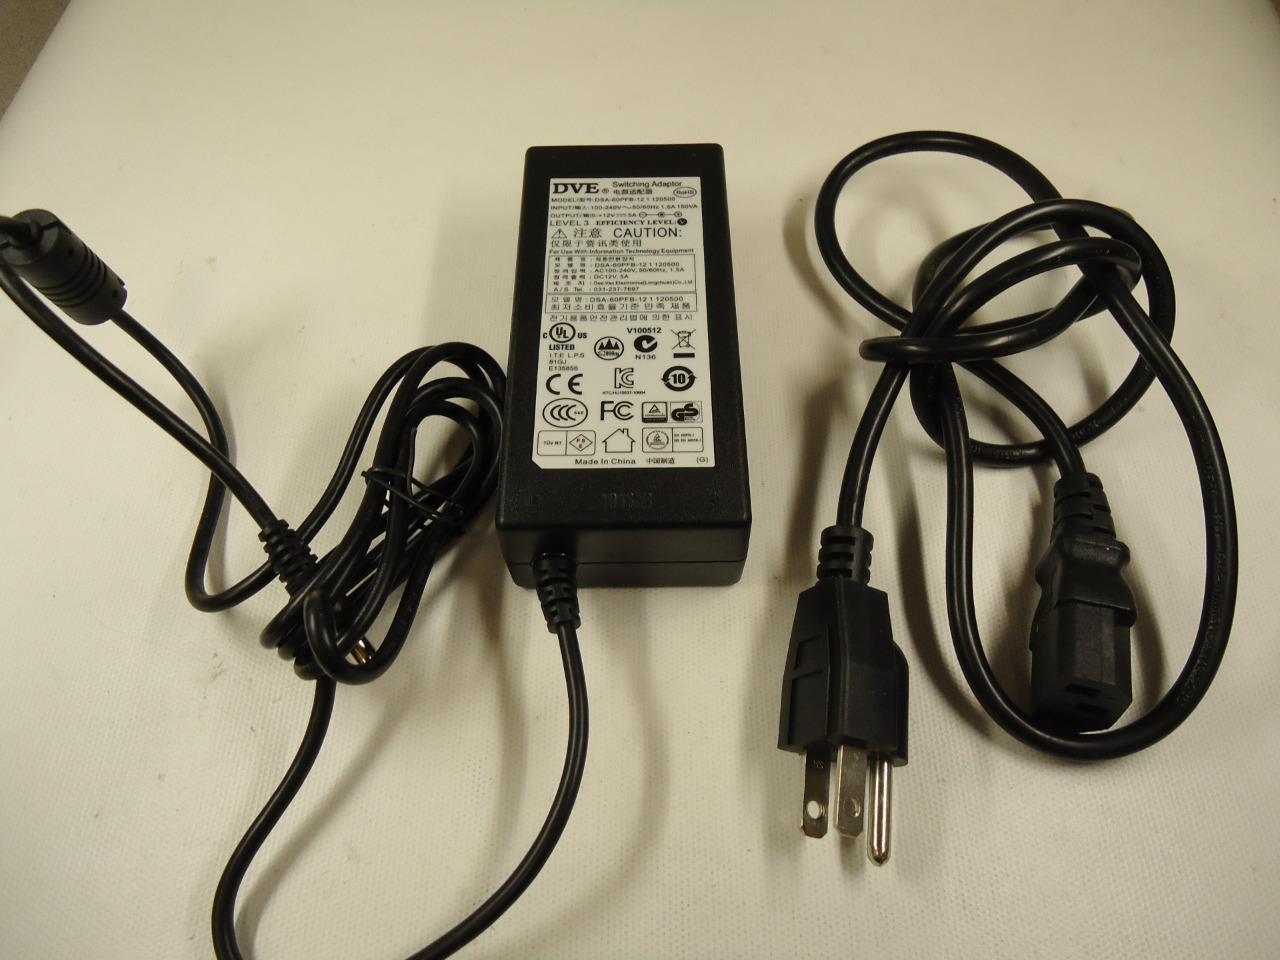 DVE DSA-60PFB-12 120500 Switching Monitor Power Supply with Power Cord New - Click Image to Close